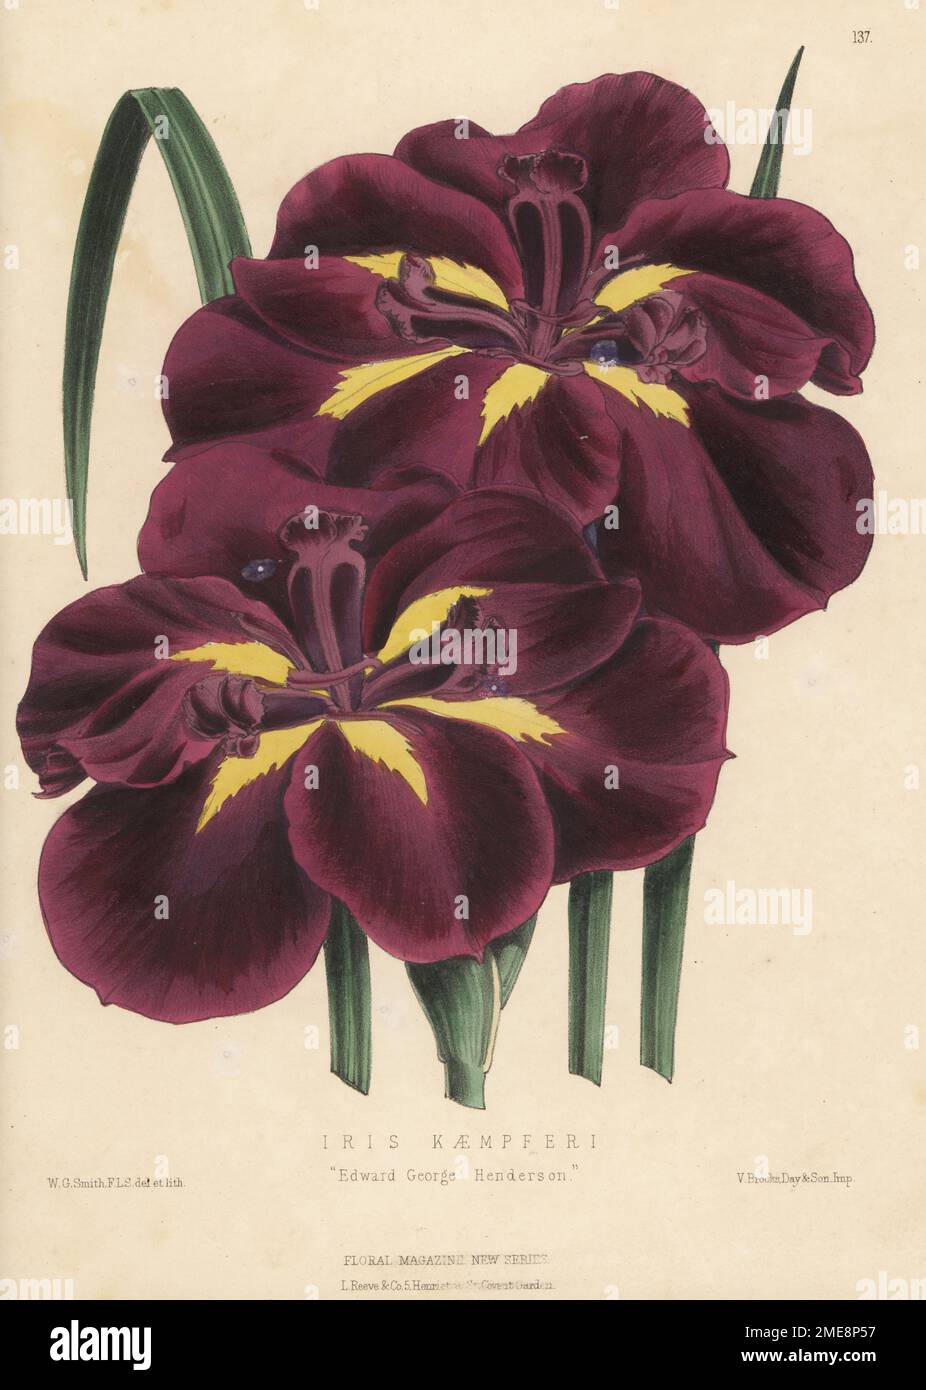 Japanese iris hybrid, Iris ensata, Edward George Henderson. Raised by Edward George Henderson and Son, Wellington Nurseries, St. John's Wood. As Iris kaempferi cultivar. Handcolored botanical illustration drawn and lithographed by Worthington George Smith from Henry Honywood Dombrain's Floral Magazine, New Series, Volume 3, L. Reeve, London, 1874. Lithograph printed by Vincent Brooks, Day & Son. Stock Photo